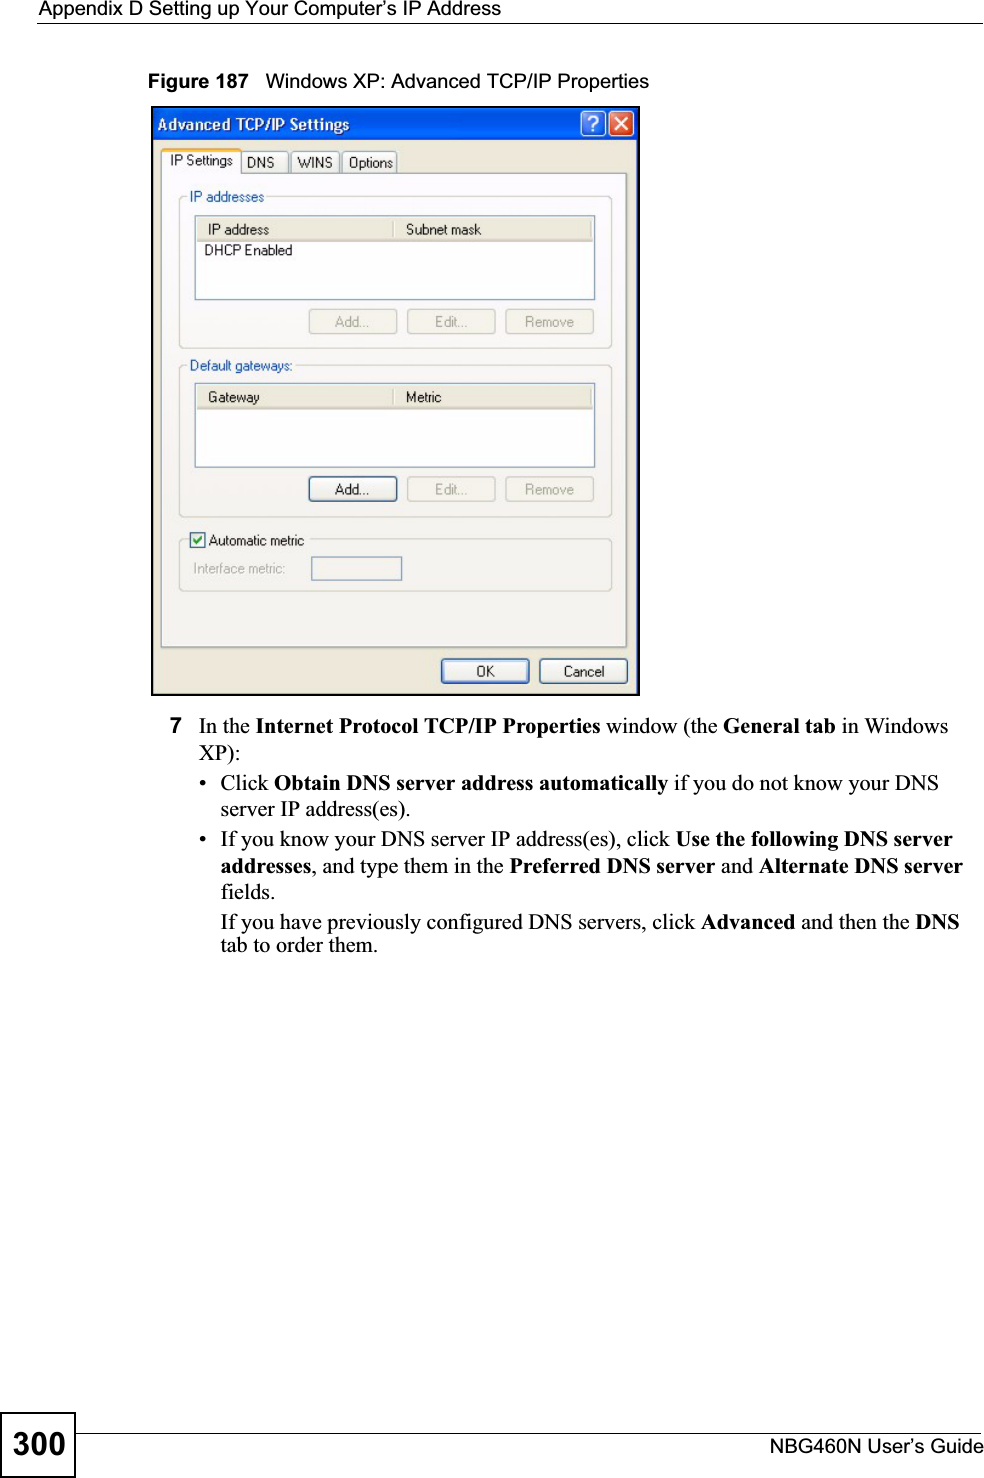 Appendix D Setting up Your Computer’s IP AddressNBG460N User’s Guide300Figure 187   Windows XP: Advanced TCP/IP Properties7In the Internet Protocol TCP/IP Properties window (the General tab in Windows XP):• Click Obtain DNS server address automatically if you do not know your DNS server IP address(es).• If you know your DNS server IP address(es), click Use the following DNS server addresses, and type them in the Preferred DNS server and Alternate DNS serverfields.If you have previously configured DNS servers, click Advanced and then the DNStab to order them.